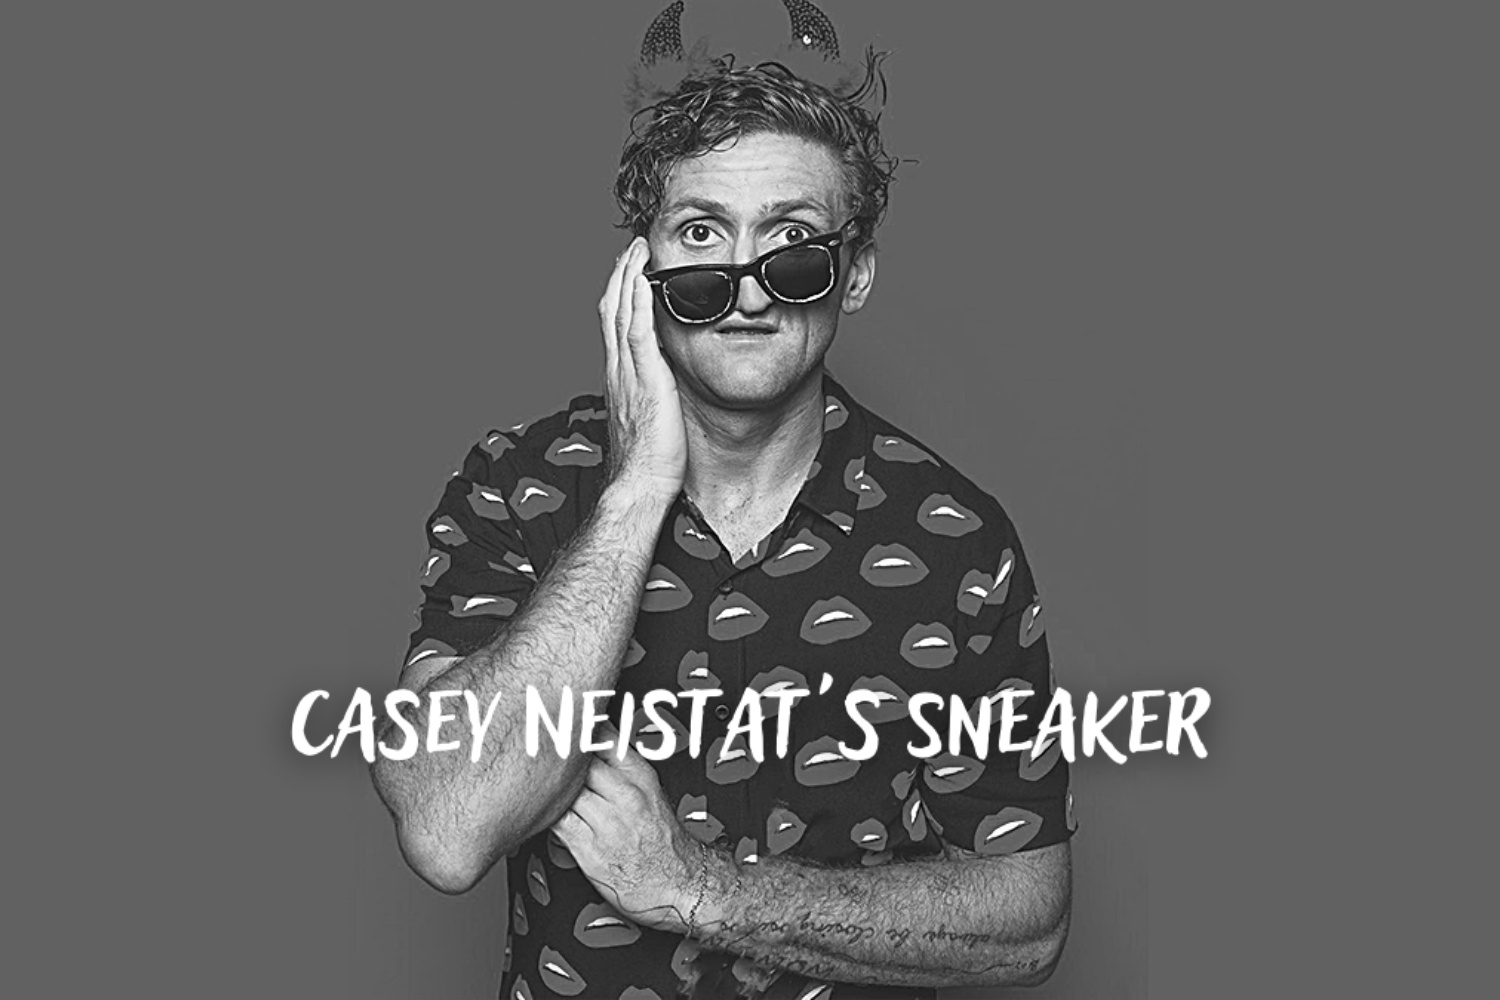 Casey Neistat and his most famous sneakers